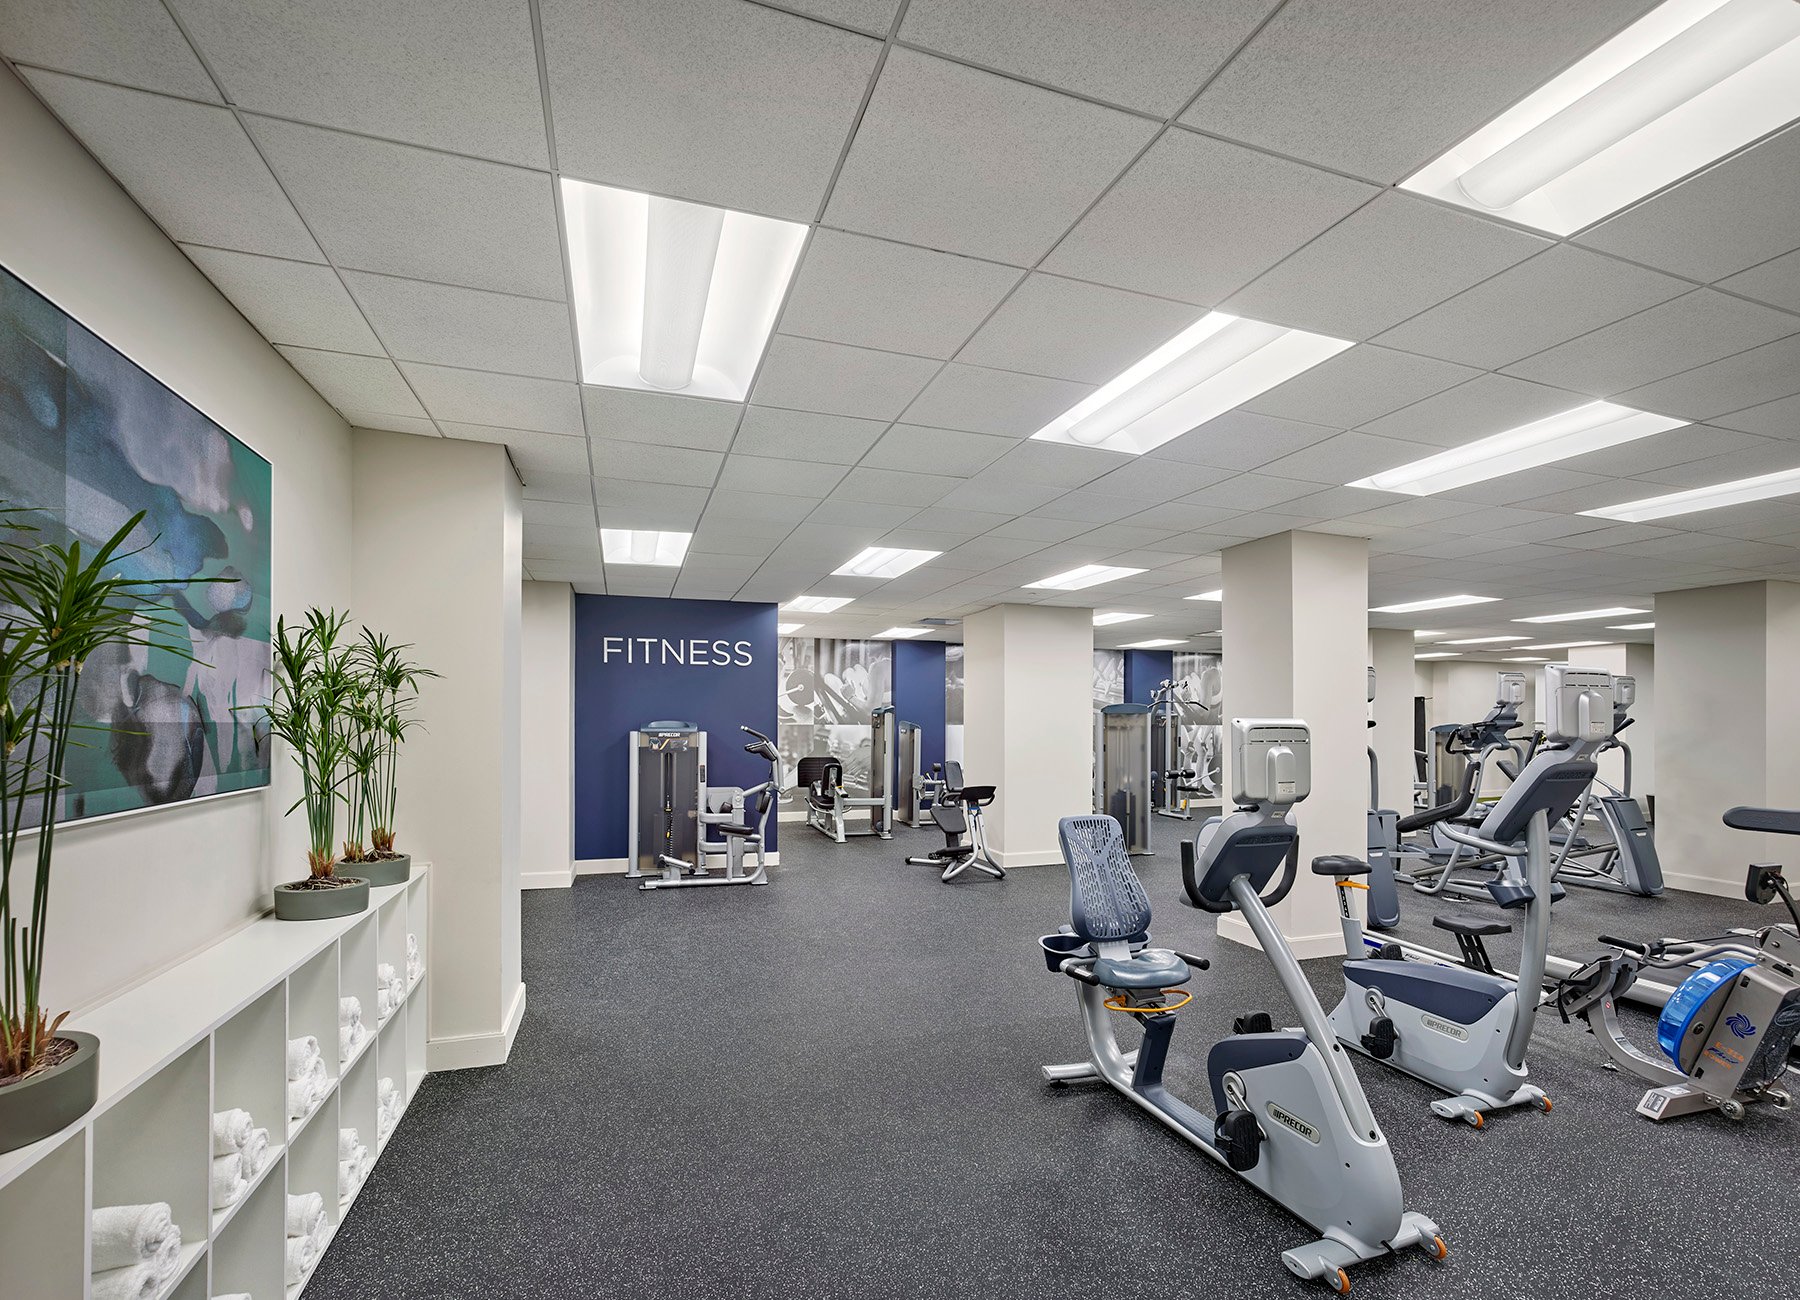 Modern Philadelphia fitness facility with cardio machines, free weights, and blue accent wall in the background